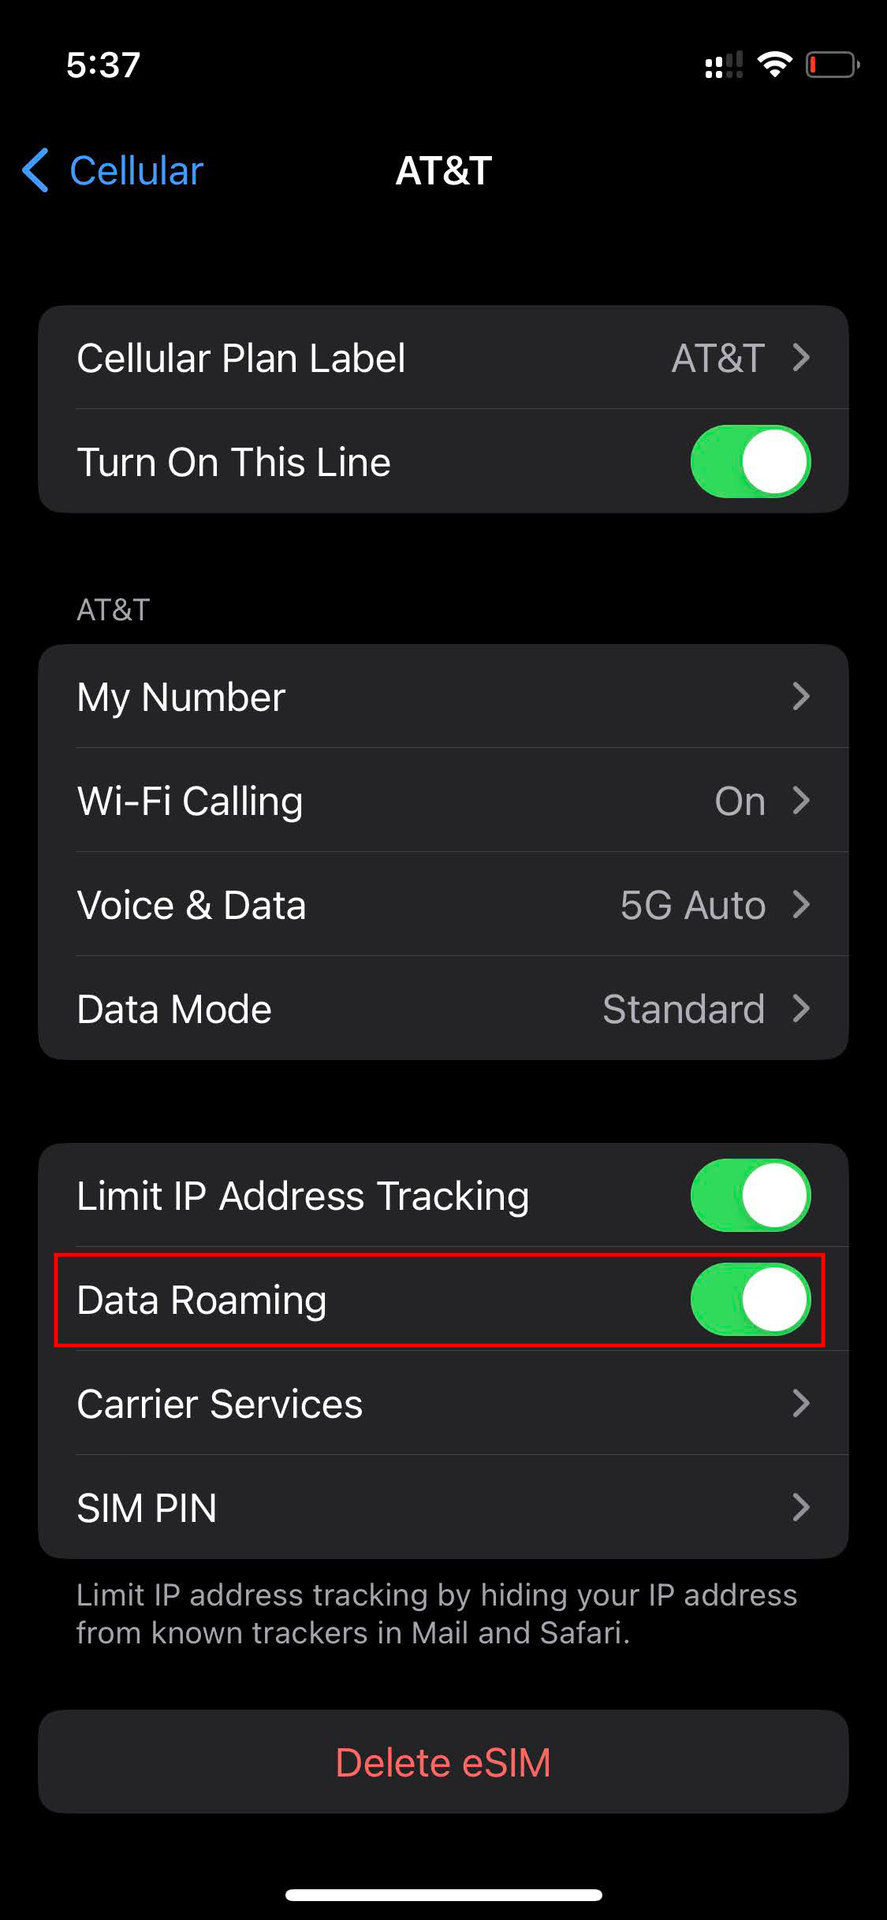 How to turn on mobile data and roaming on iPhone 4